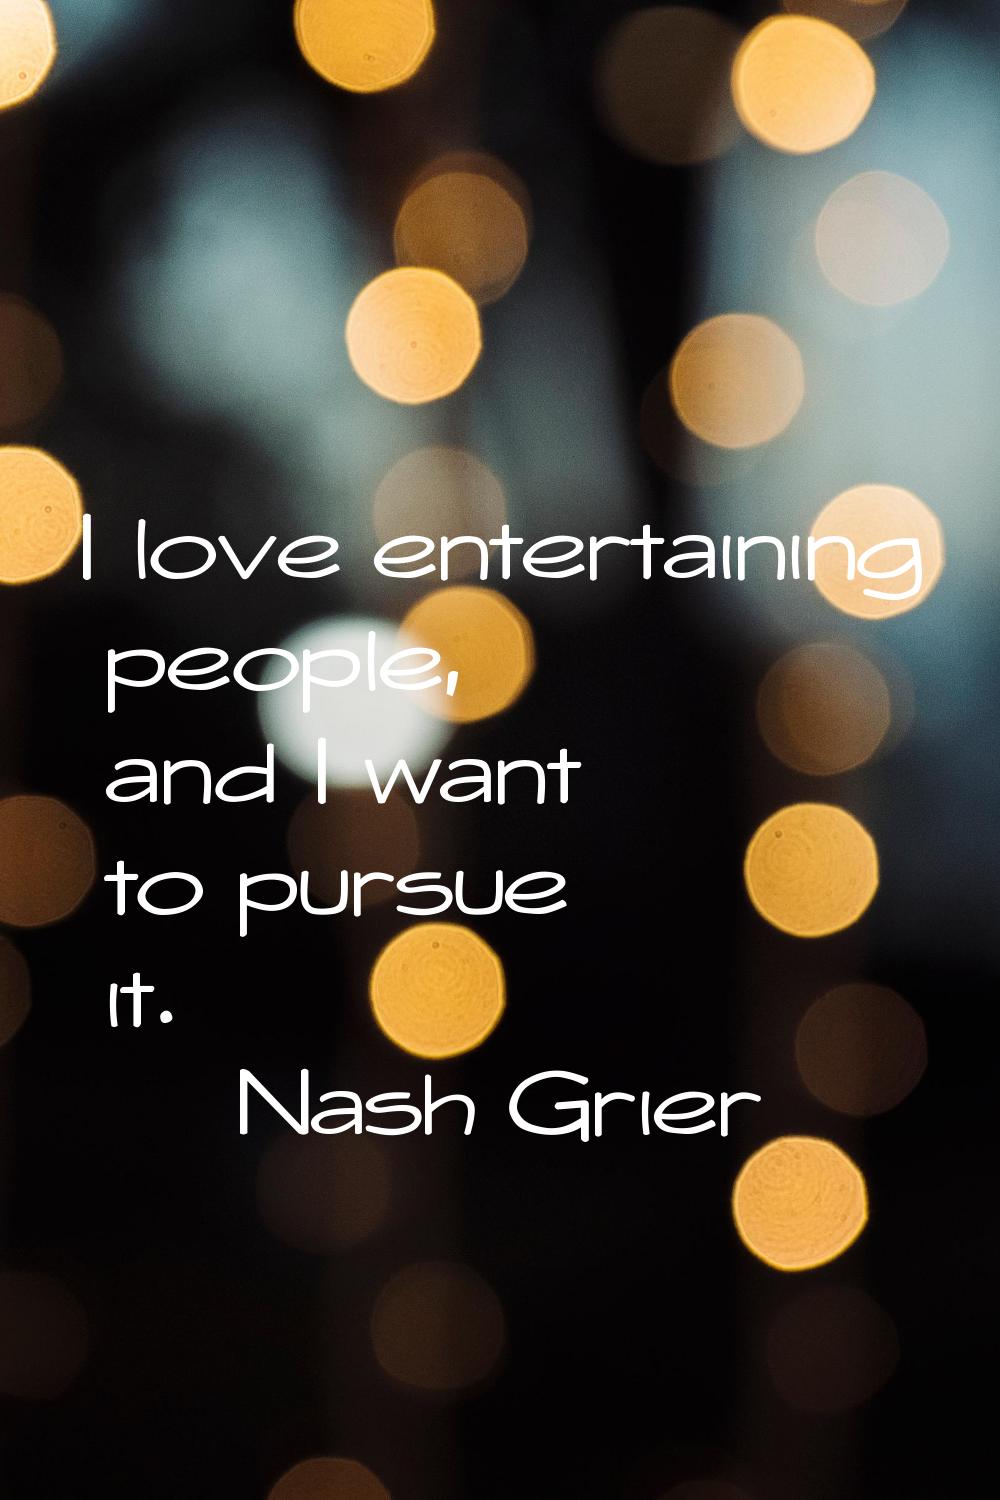 I love entertaining people, and I want to pursue it.